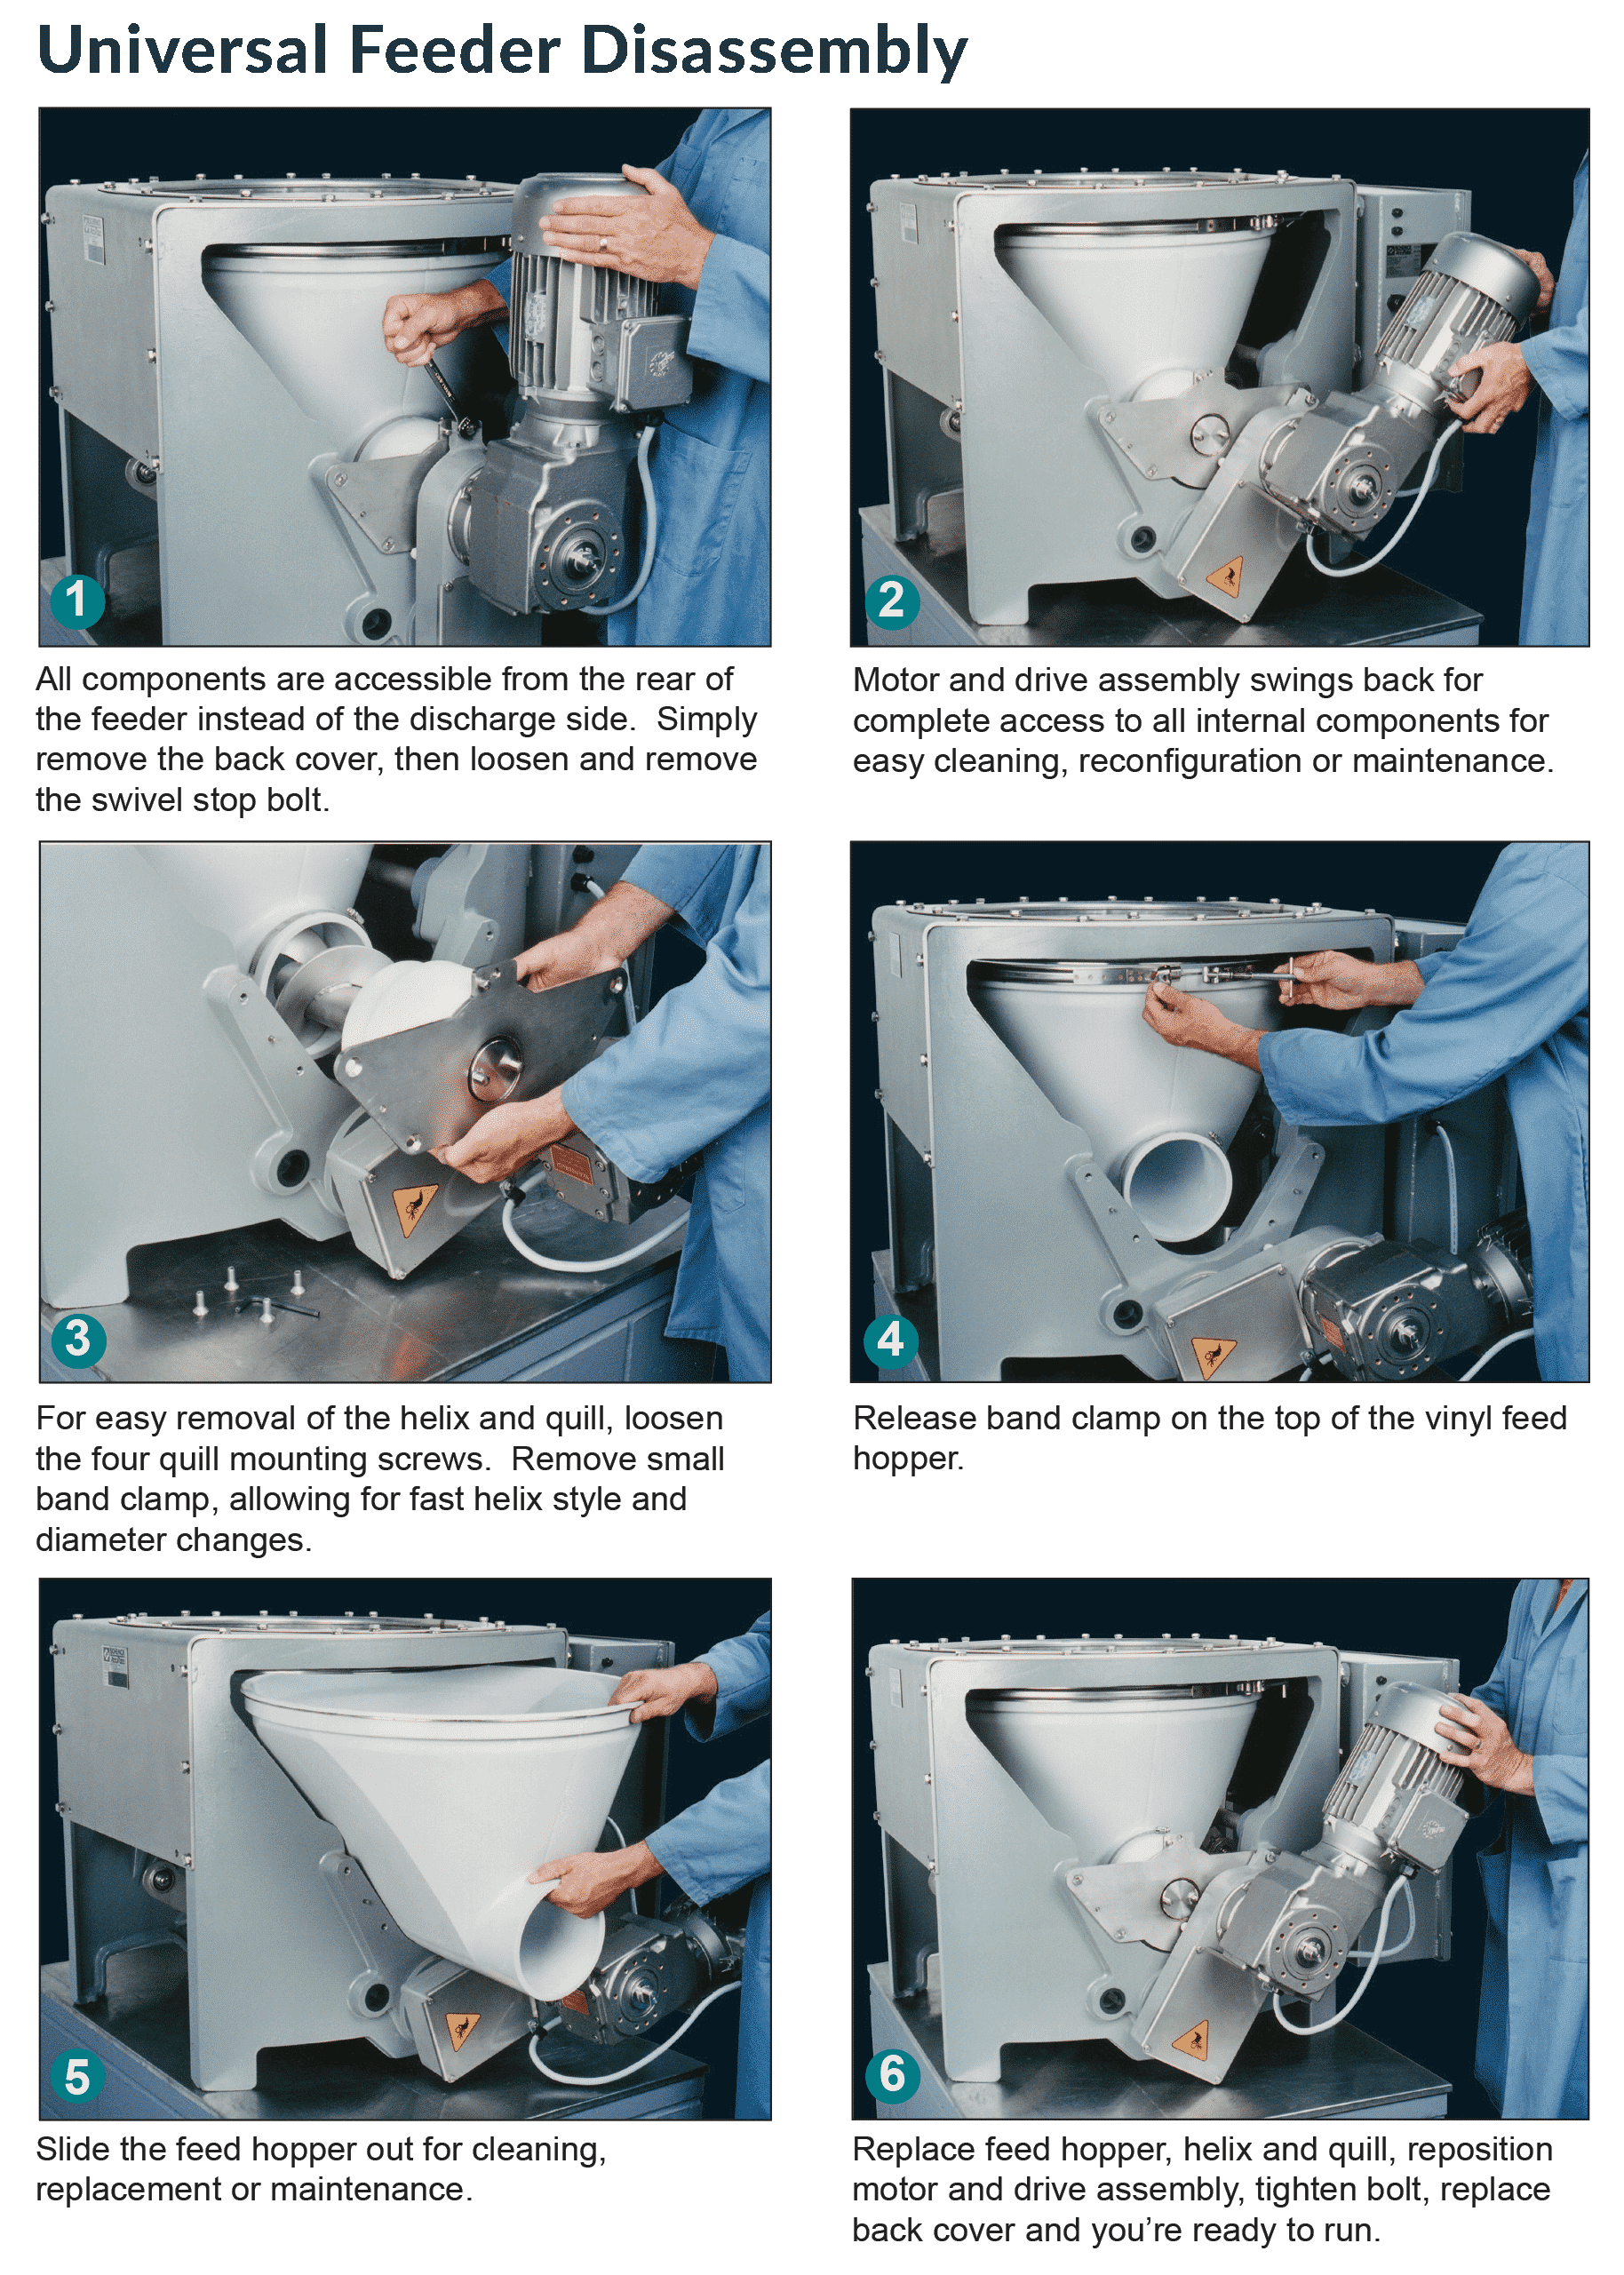 Universal Feeder cleaning and dismantling procedure